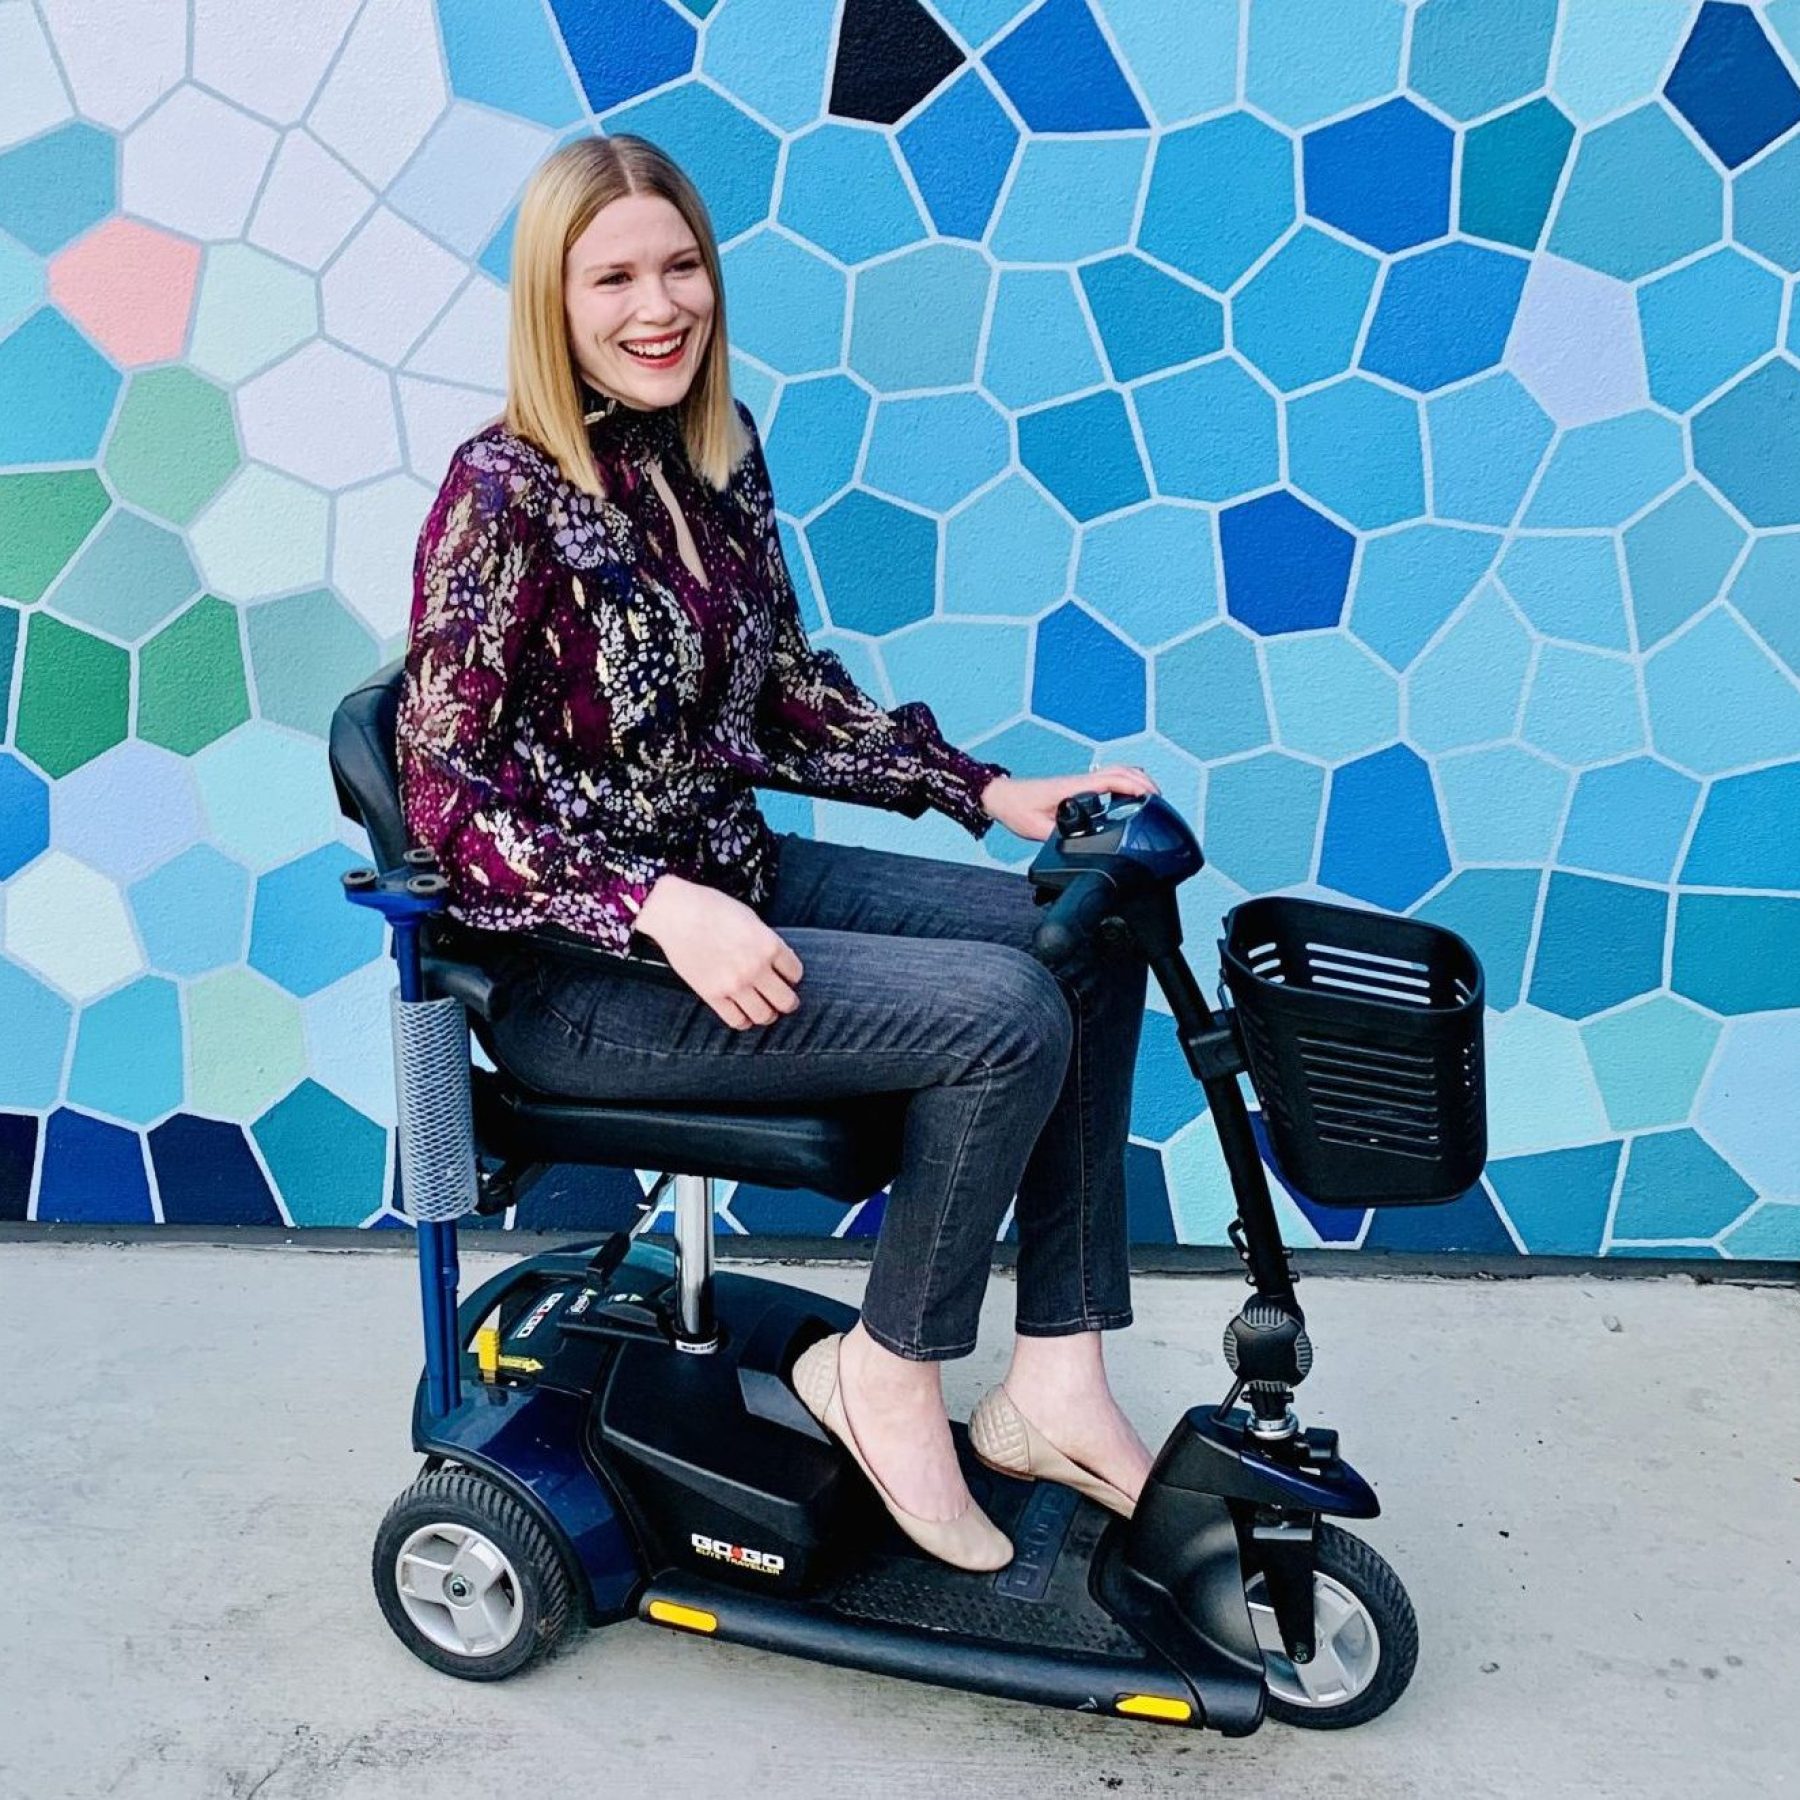 A white woman with straight, blonde hair, wearing a burgundy patterned shirt and grey jeans sits on a blue and black mobility scooter and smiles in front of a wall with a variety of blue and white geometric shapes.